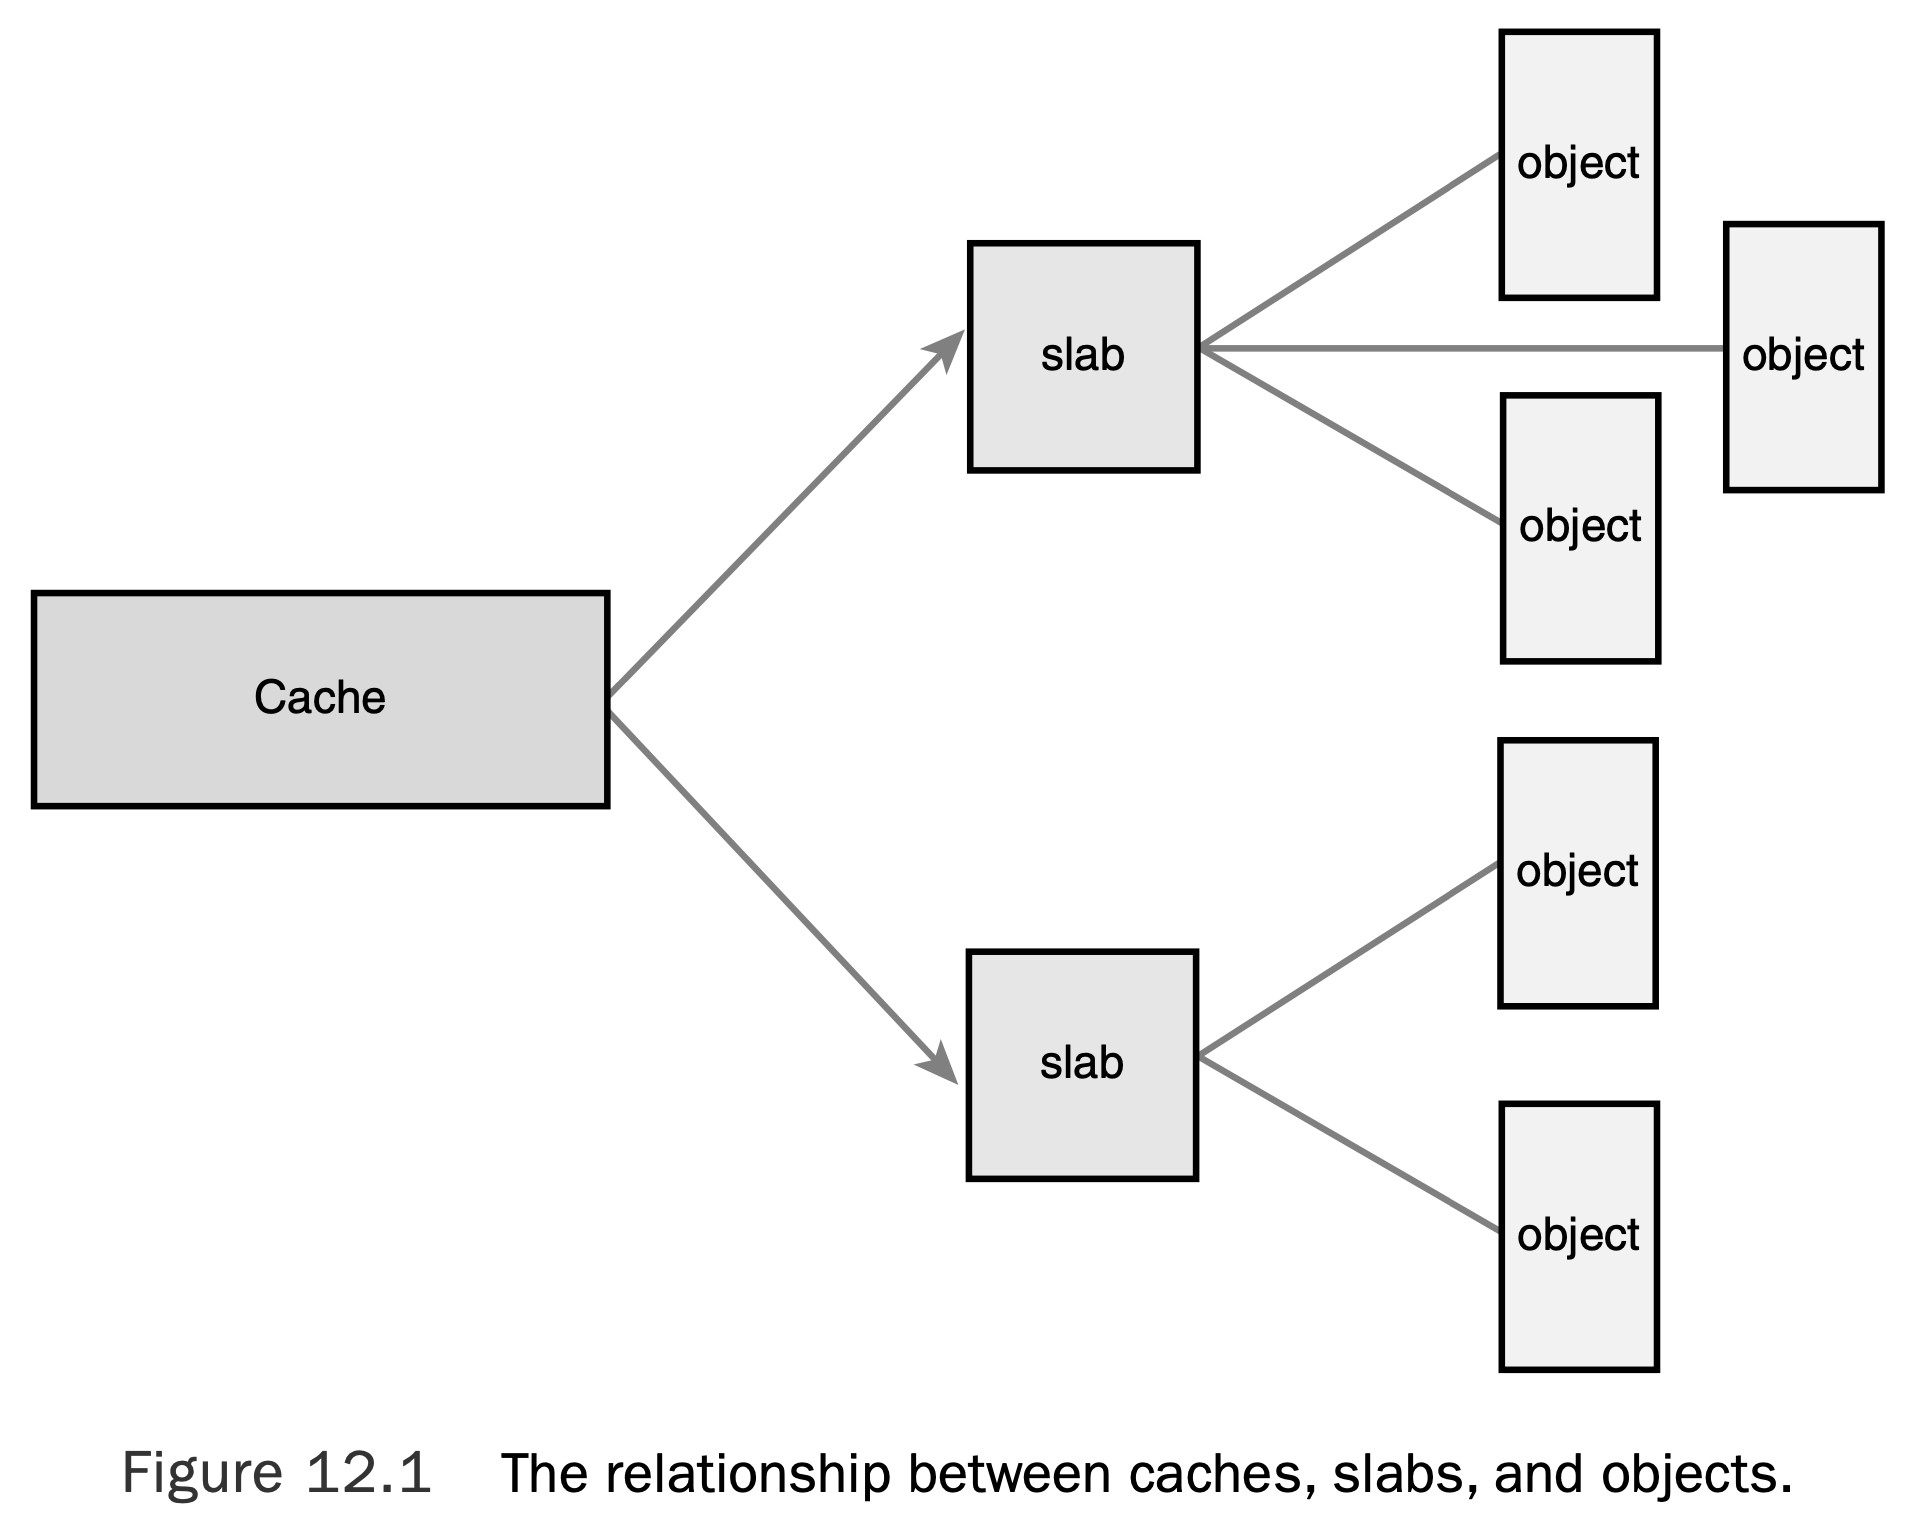 The relationship between caches, slabs, and objects.